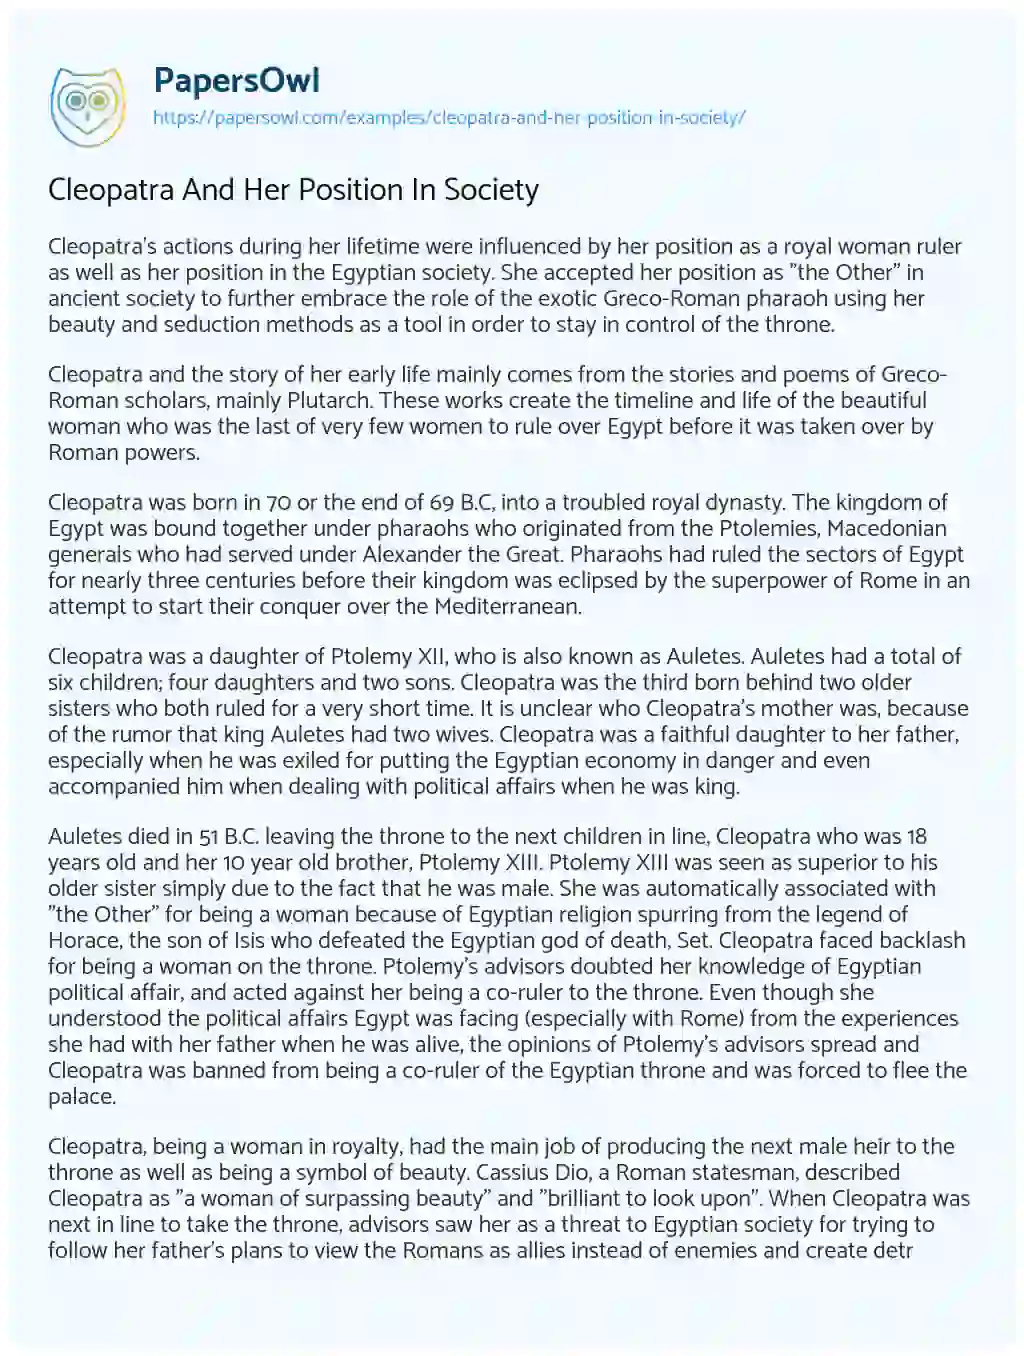 Essay on Cleopatra and her Position in Society